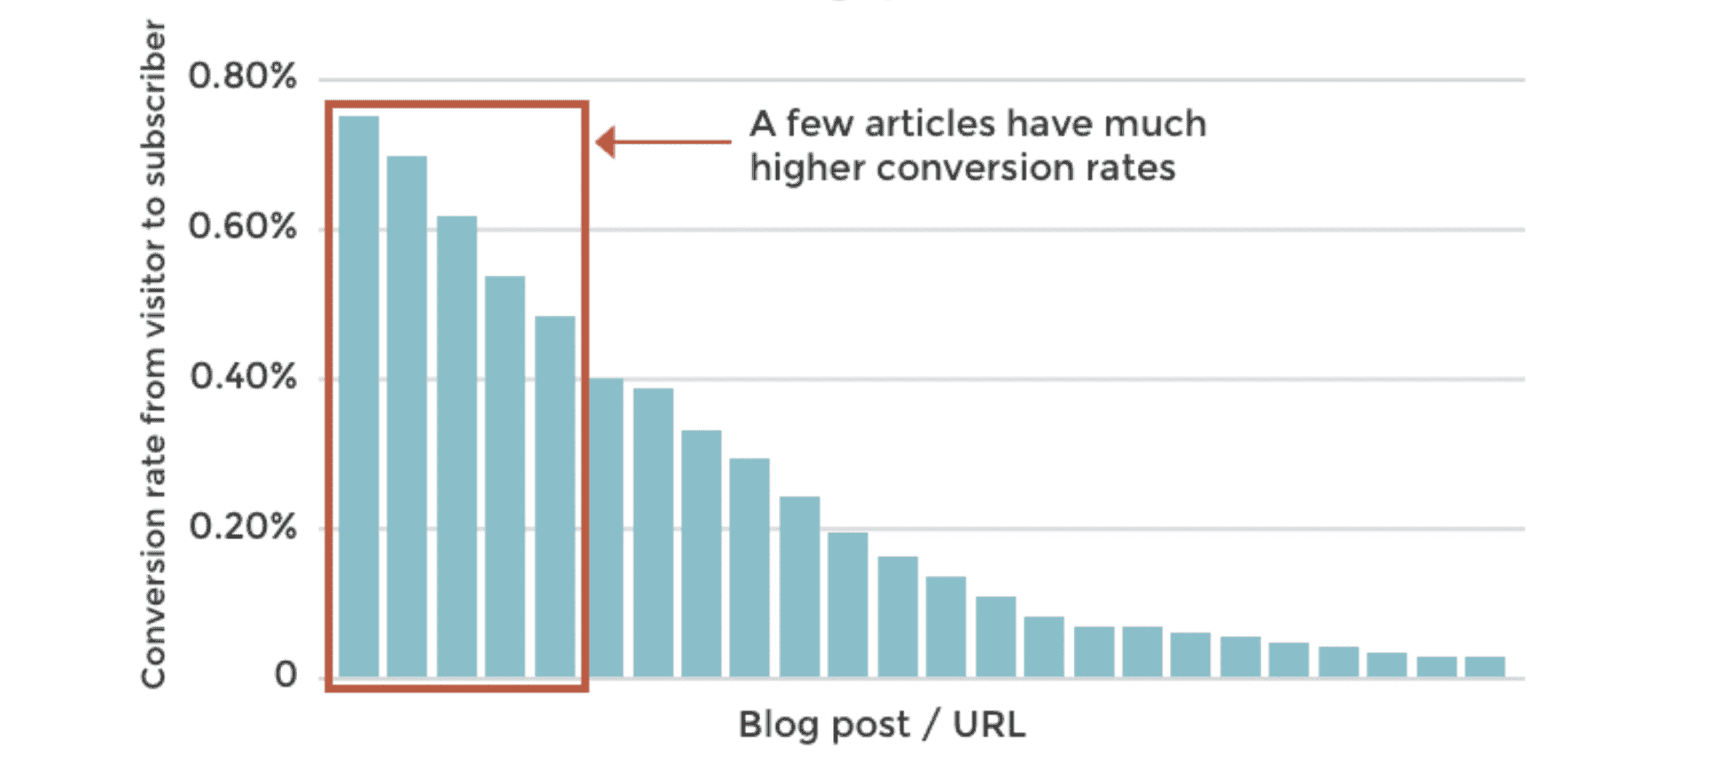 chart showing a few articles have much higher conversion rates